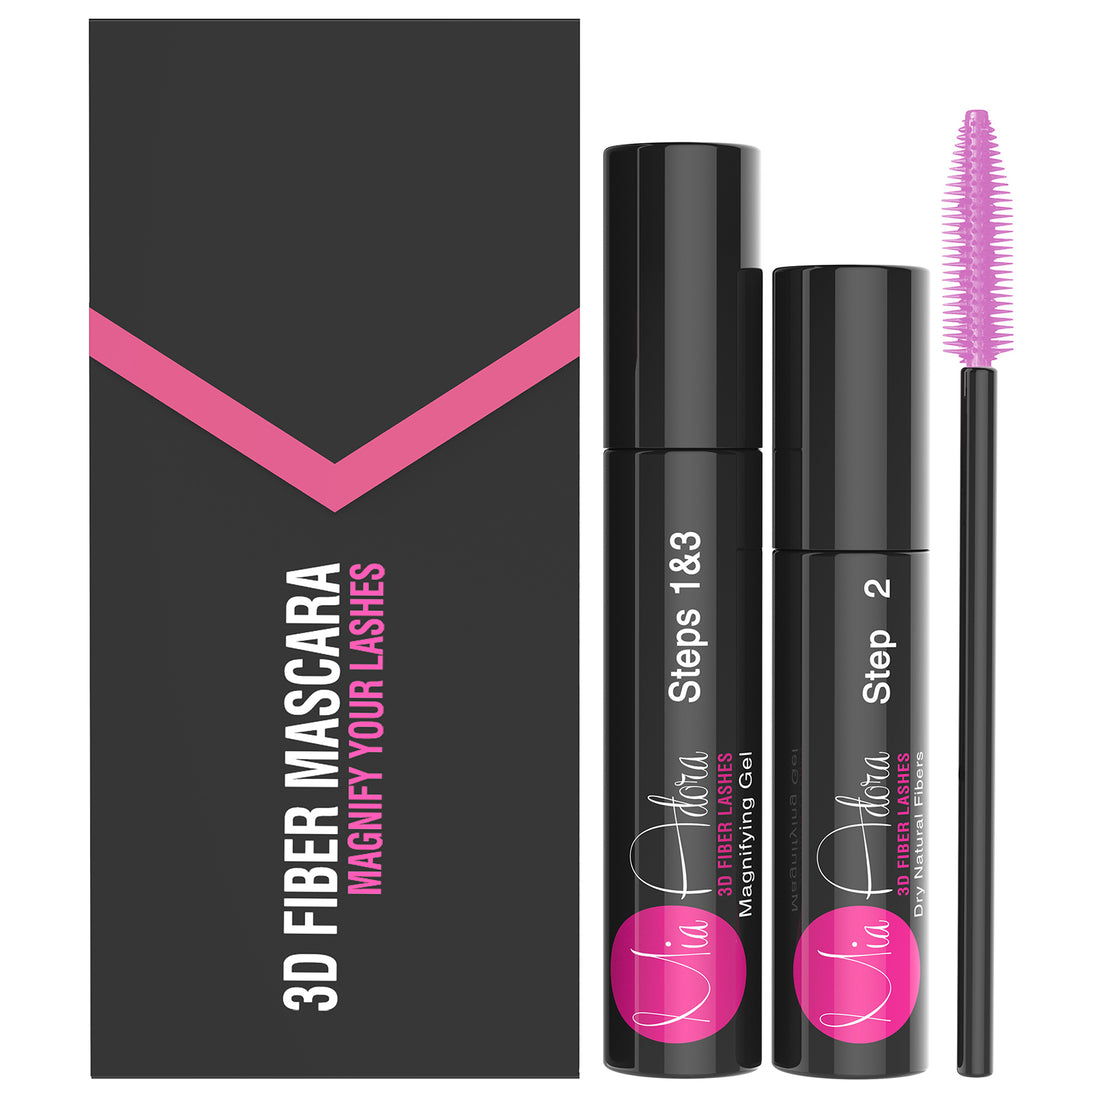 Best 3D Fiber Lash Mascara in Texas for the Final Season of The Big Bang Theory